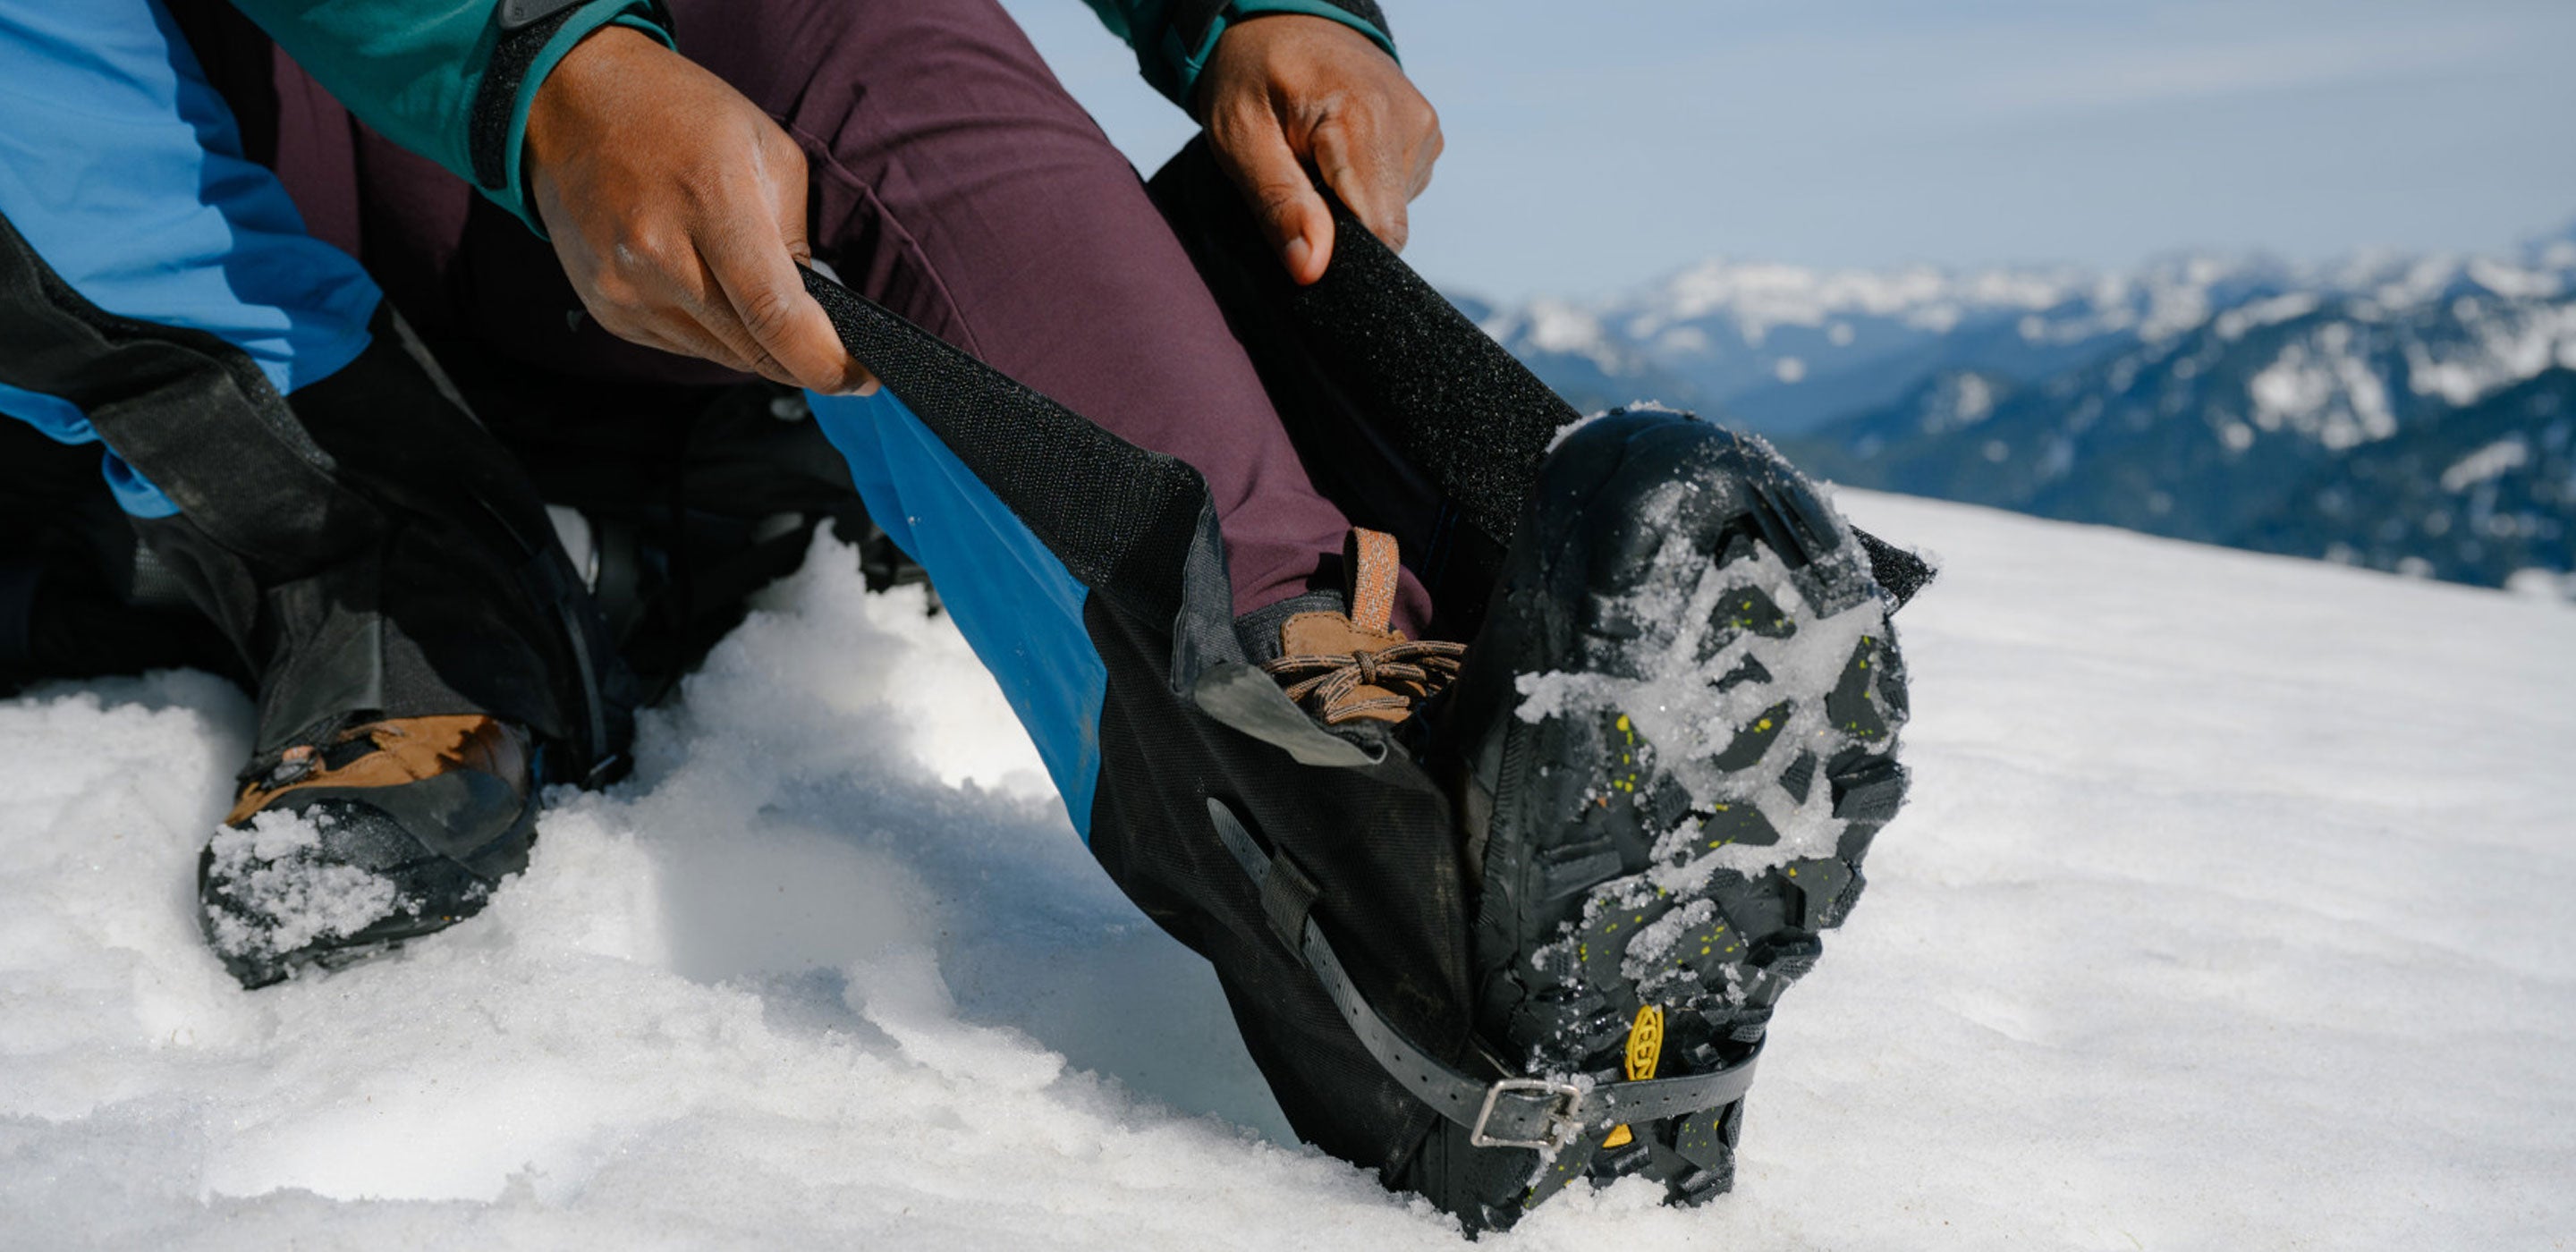 KEEN.POLAR TRACTION: WinterLab-Tested Grip